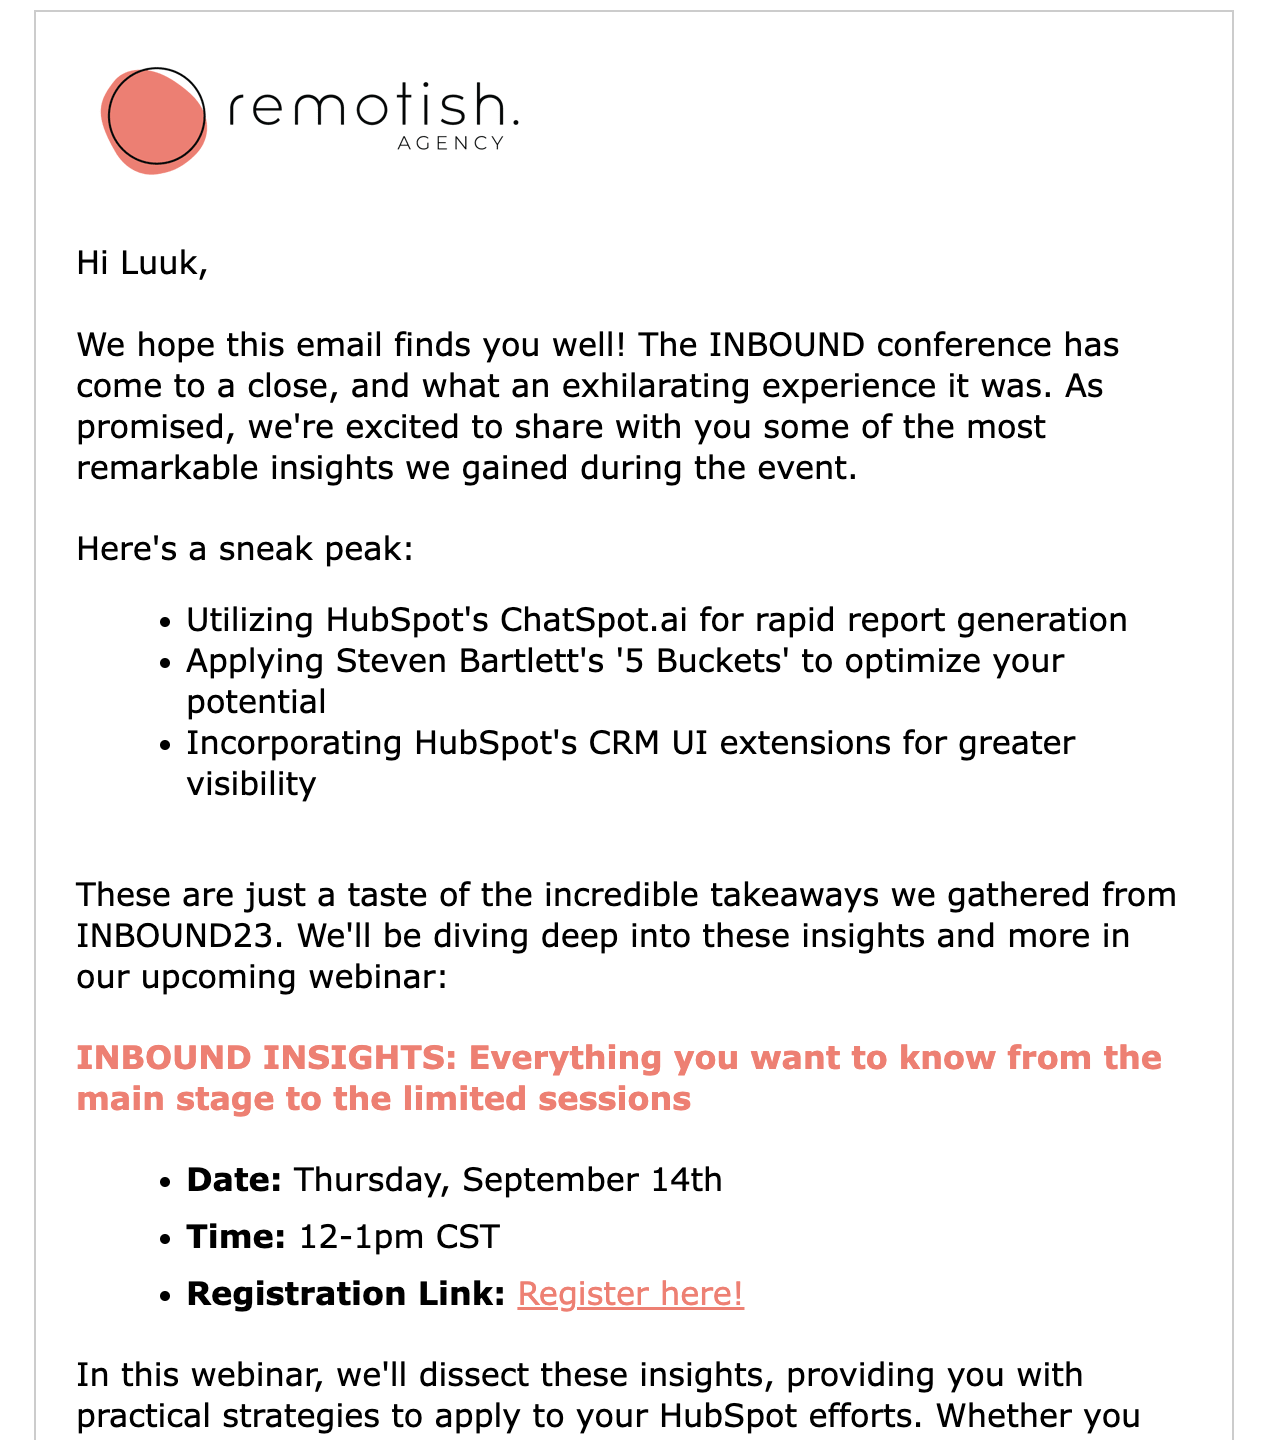 Screenshot of a webinar invitation email from Remotish